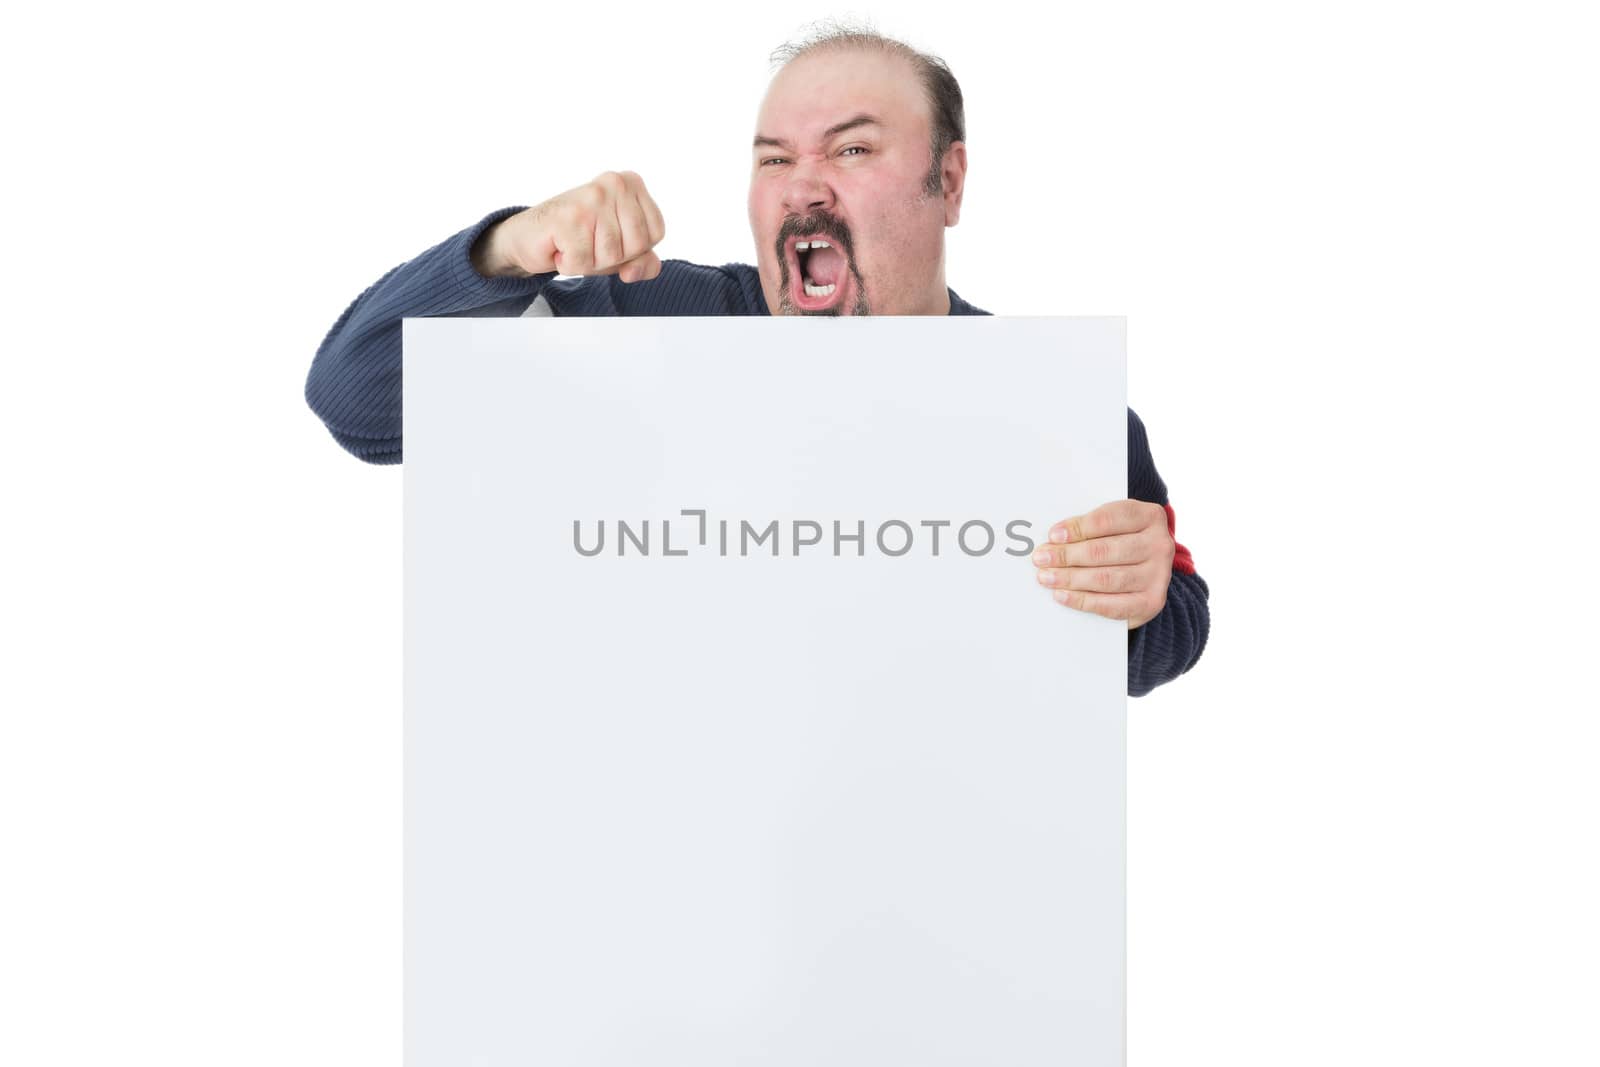 Mature man holding a blank white billboard and protesting